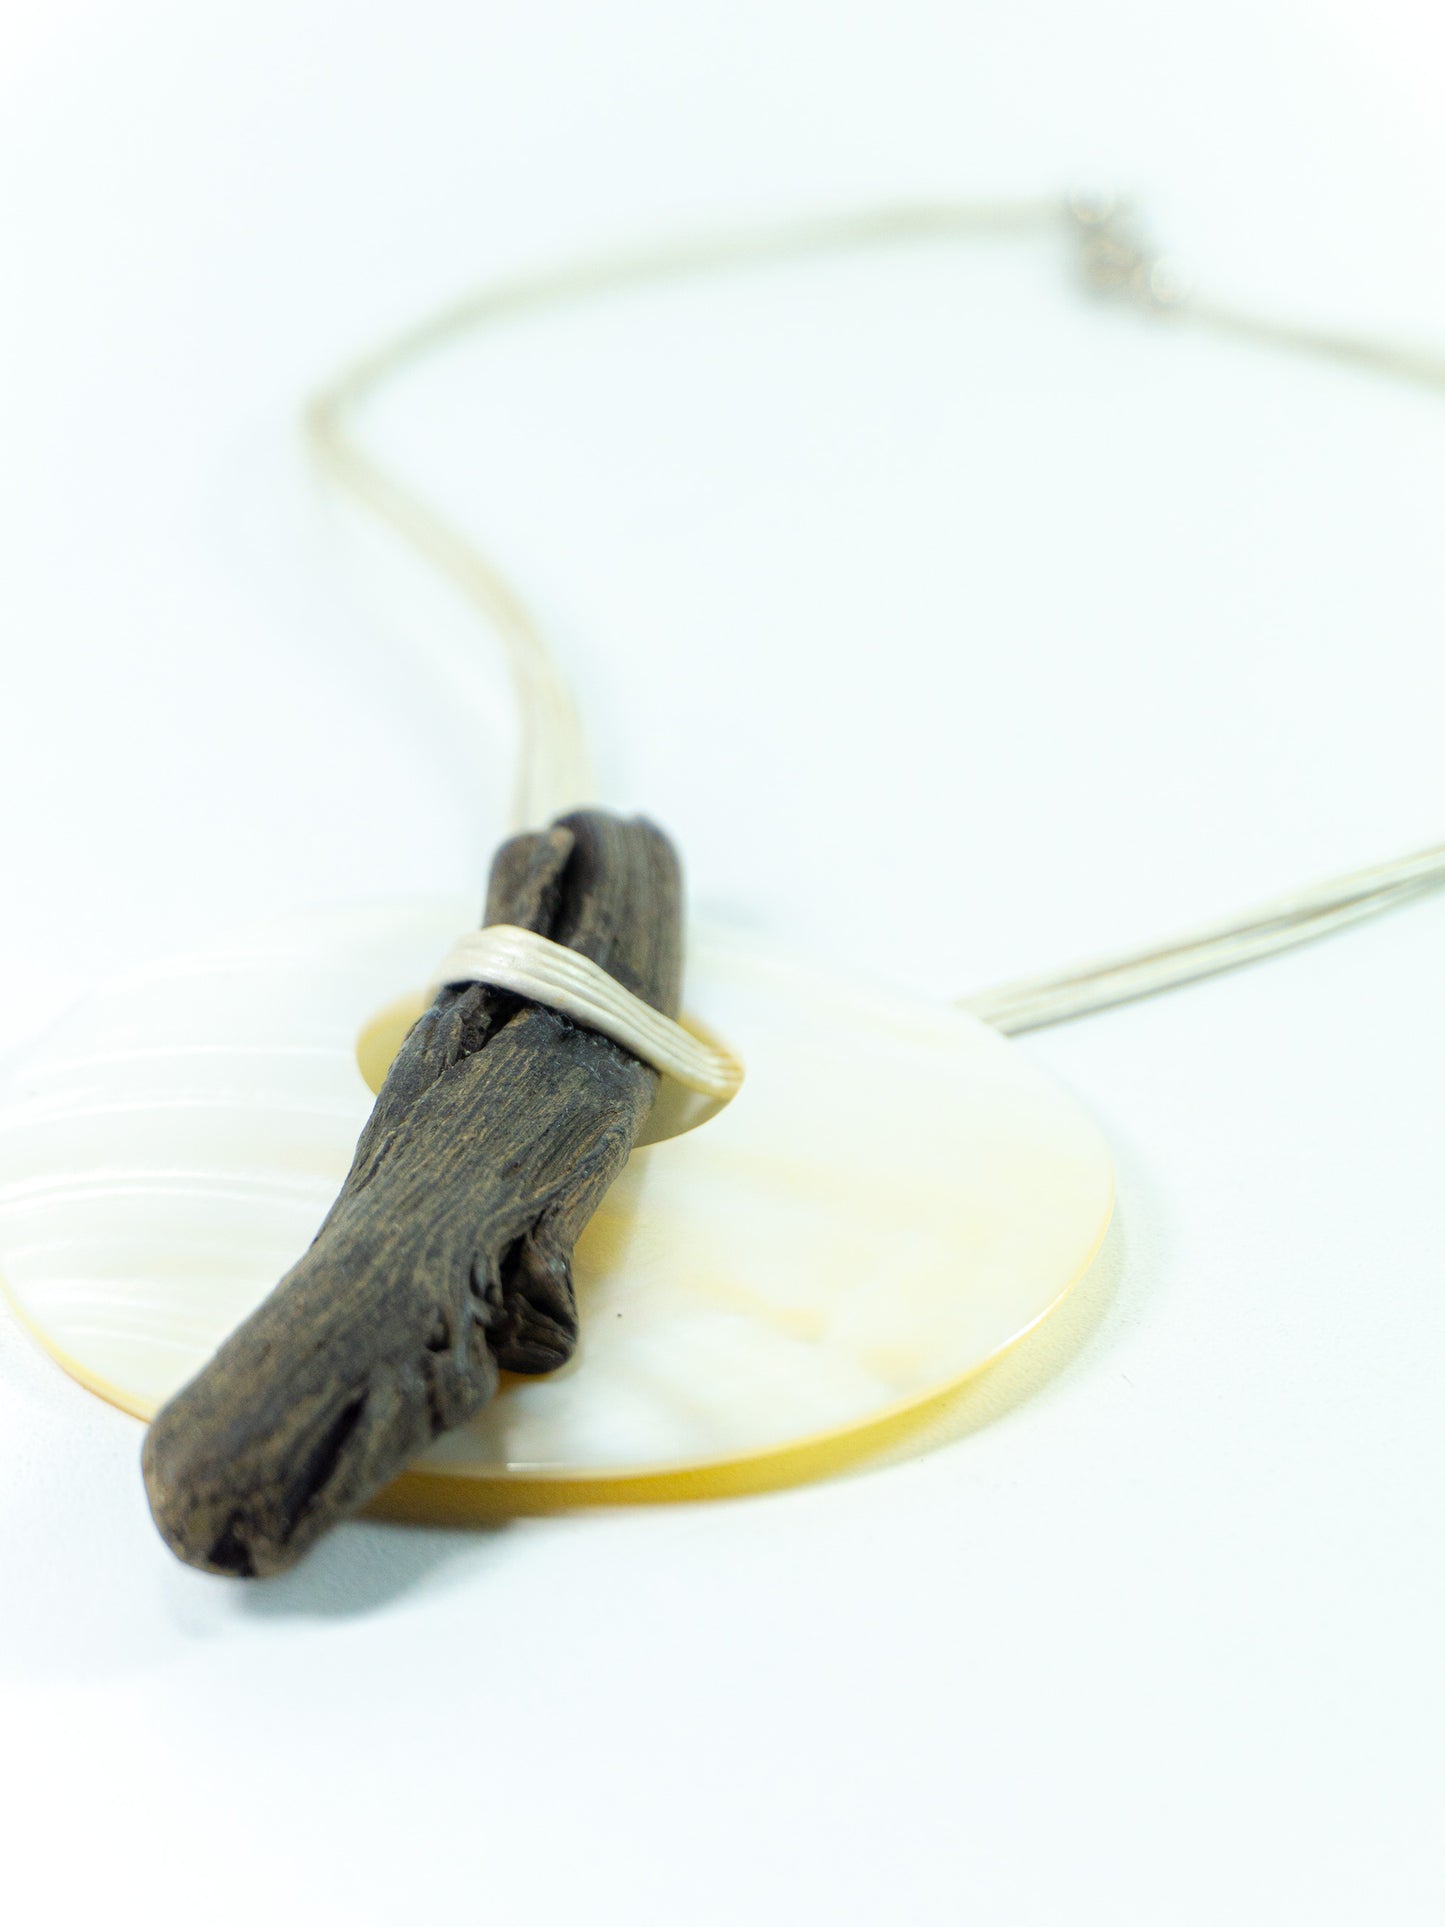 DRIFTWOOD Mother-of-pearl leather NECKLACE 'Helgoland', unique handmade jewelry